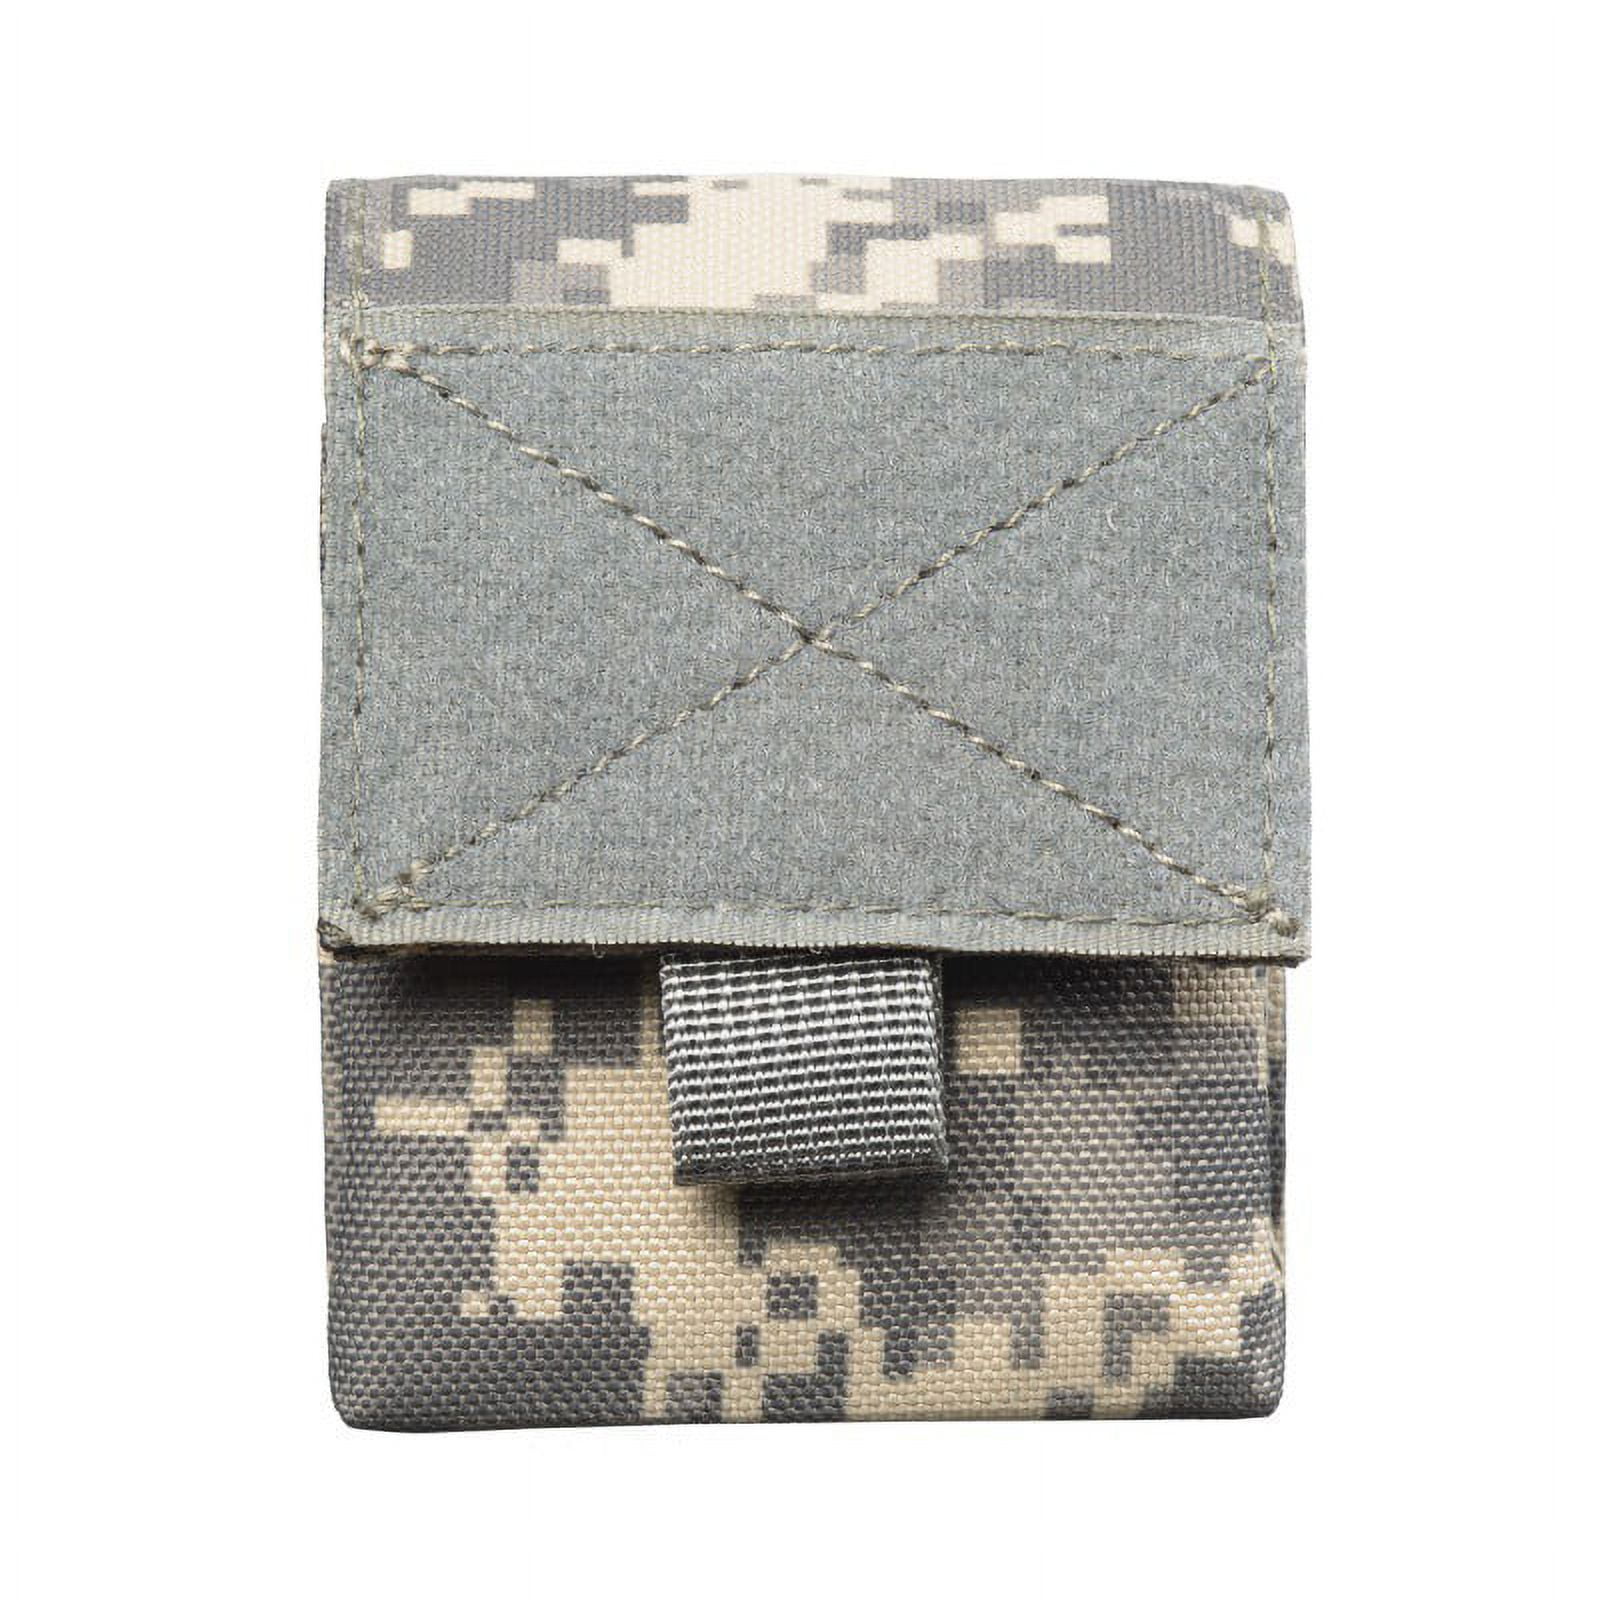 Tactical Molle EDC Pouch, Multipurpose Waterproof Utility Bag for Outdoor  Hunting Hiking Riding Camping Outdoor Sports 